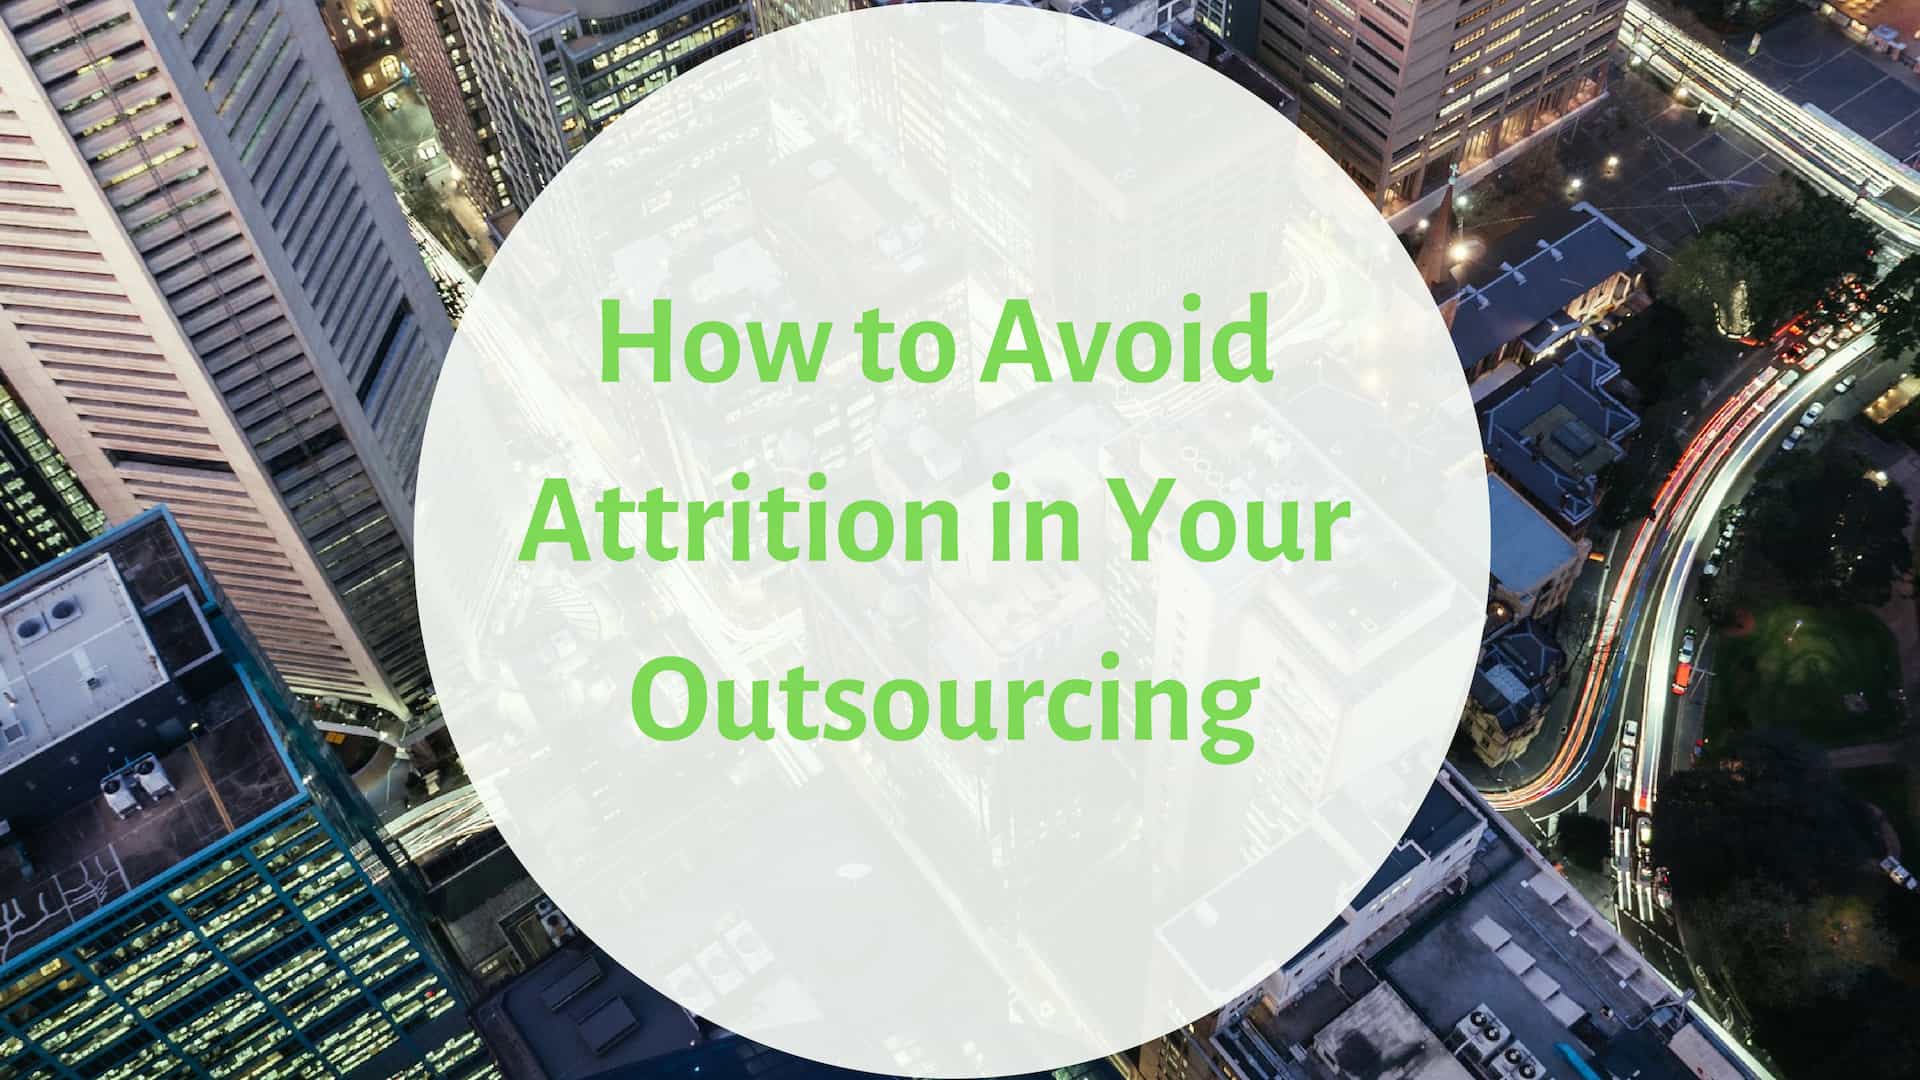 How To Avoid Attrition In Your Outsourcing